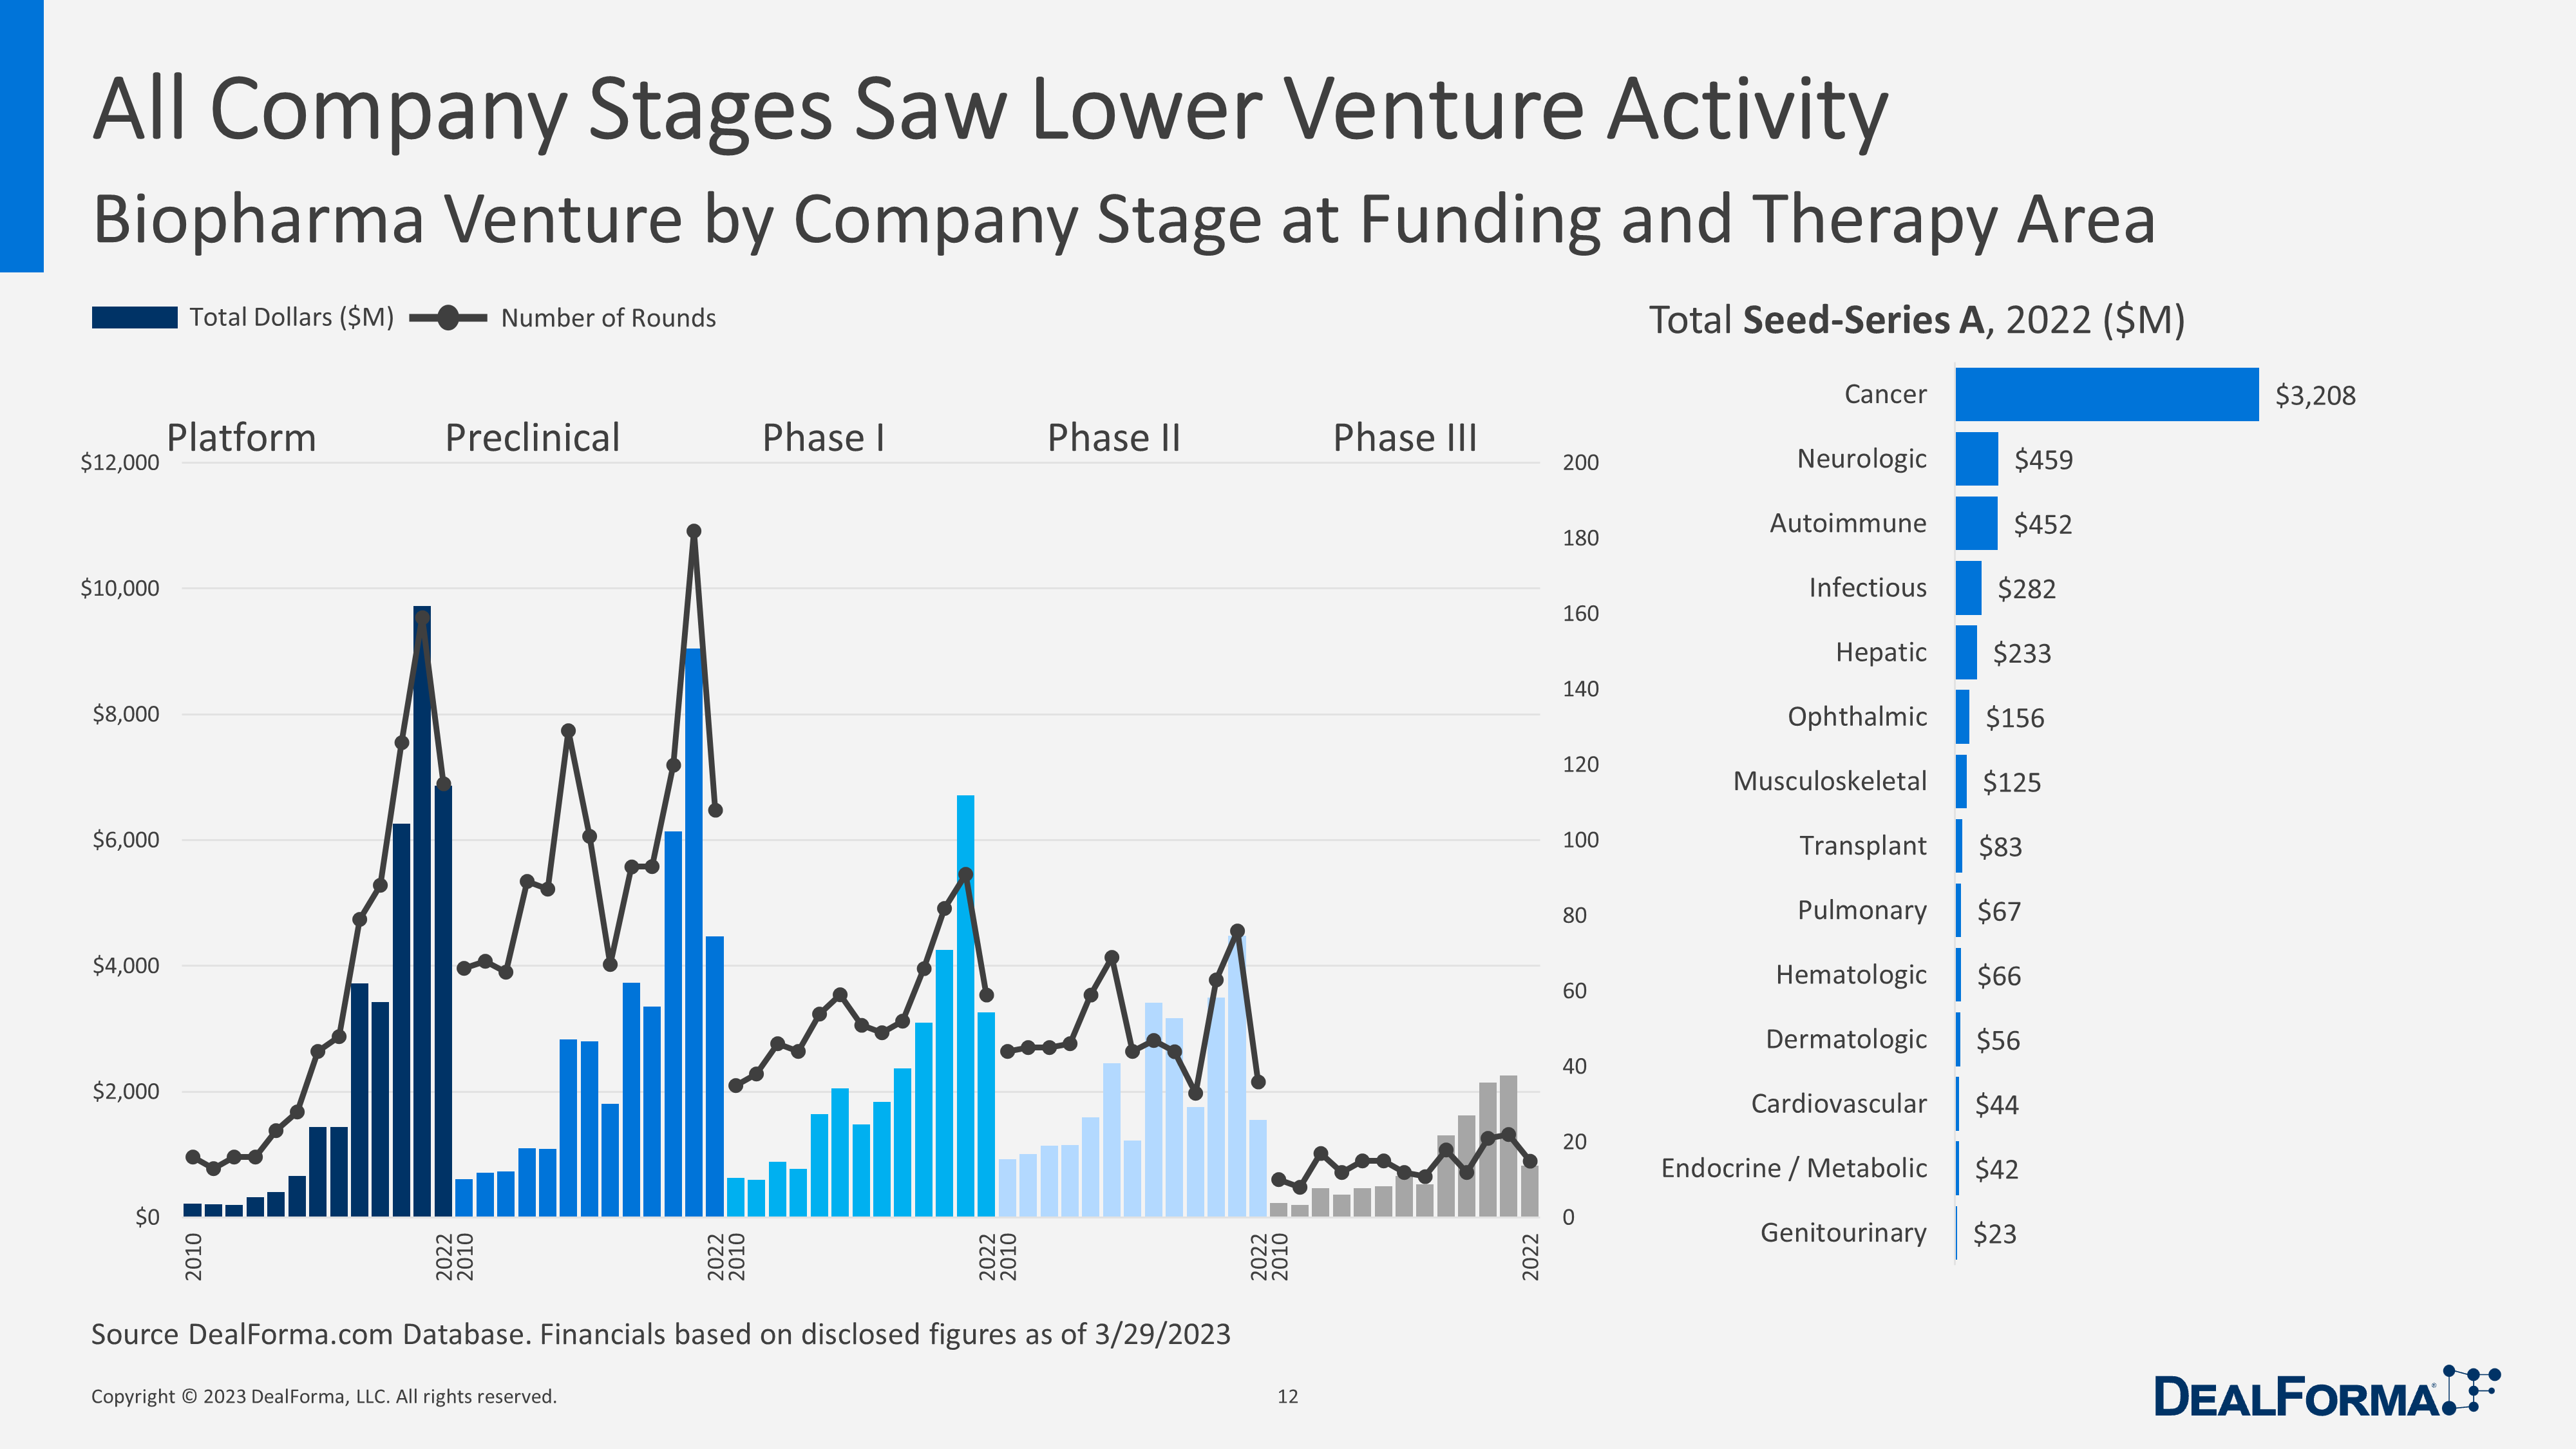 All Company Stages Saw Lower Venture Activity